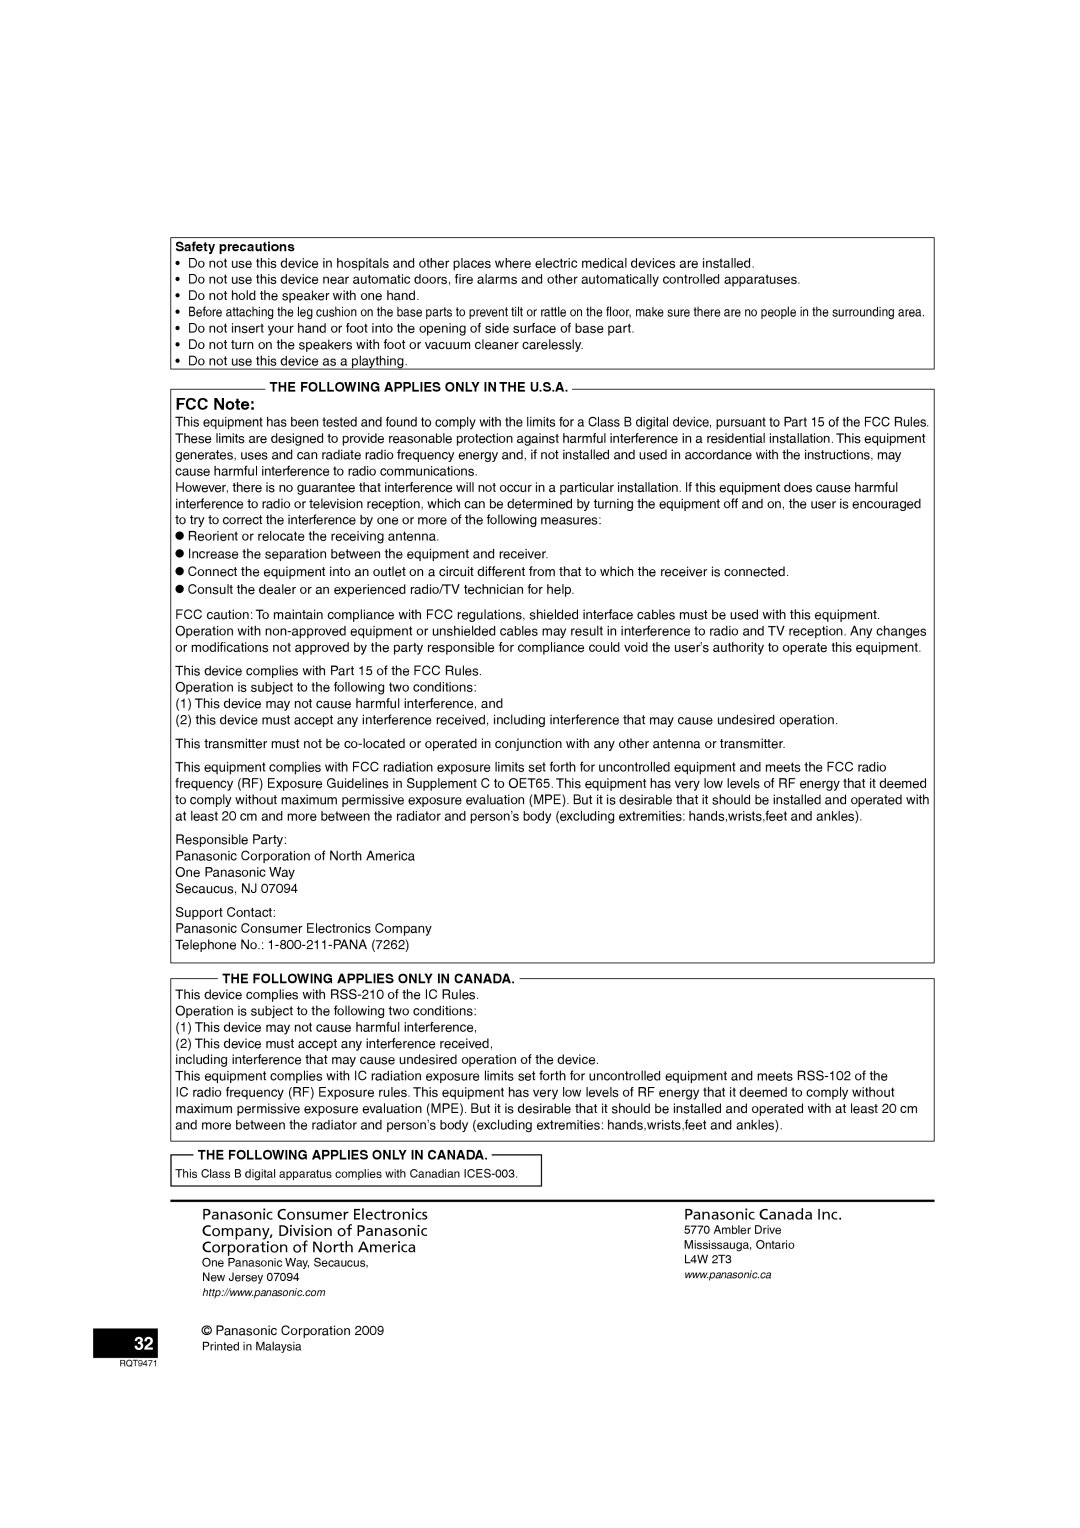 Panasonic SC-ZT1 warranty FCC Note, Safety precautions, The Following Applies Only In The U.S.A 